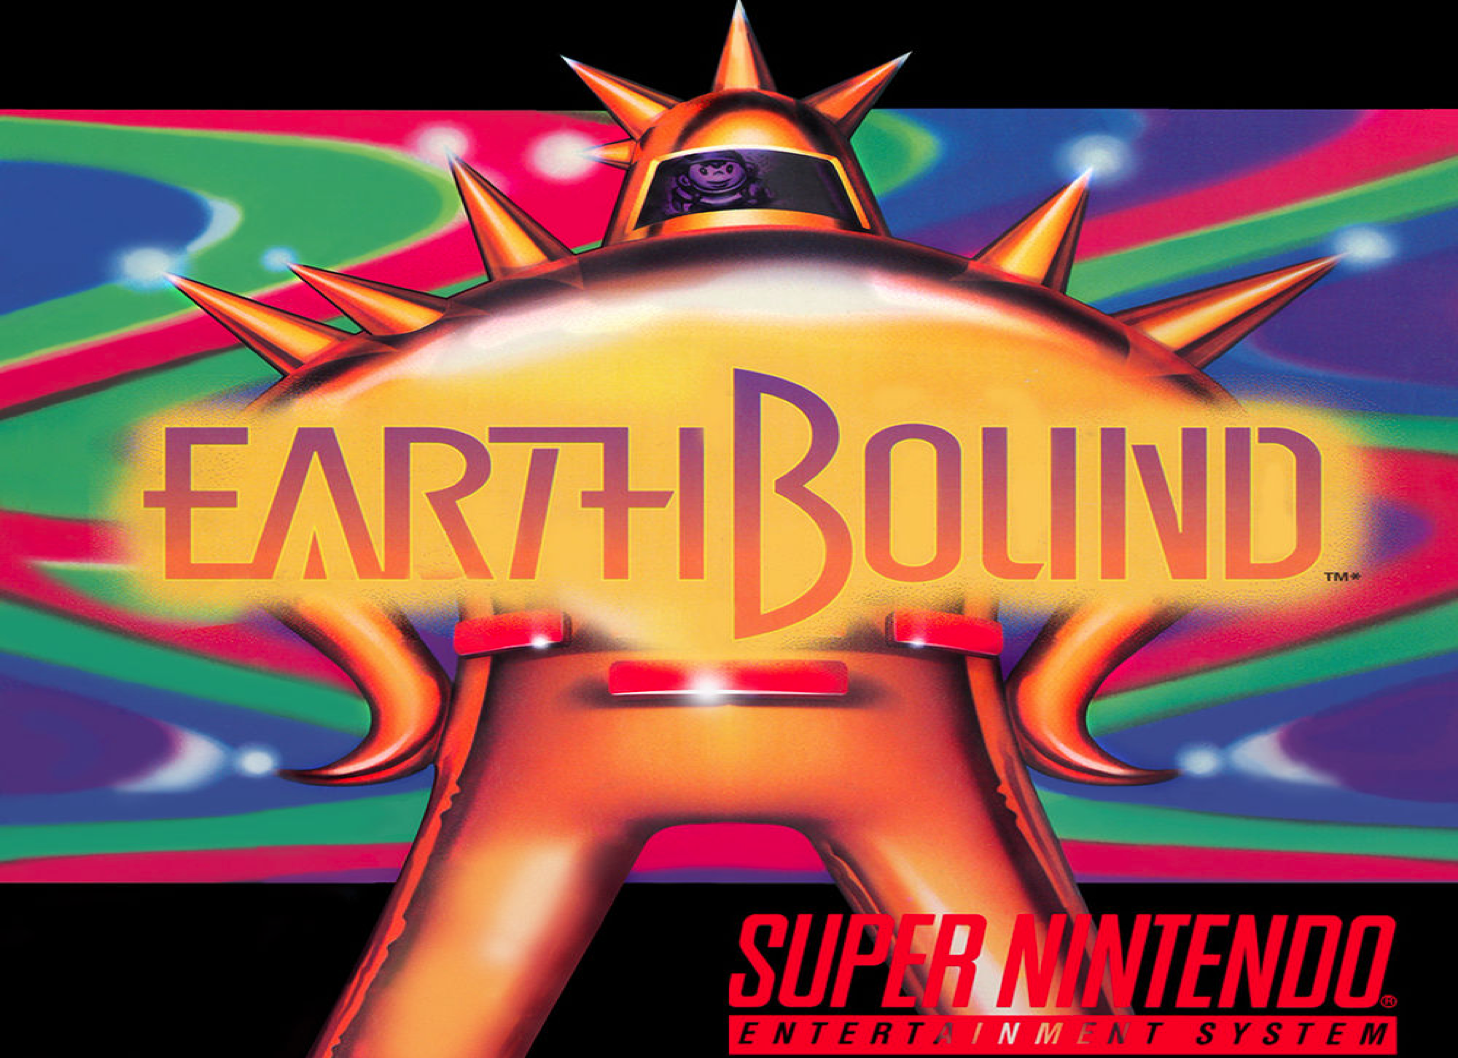 earthbound title